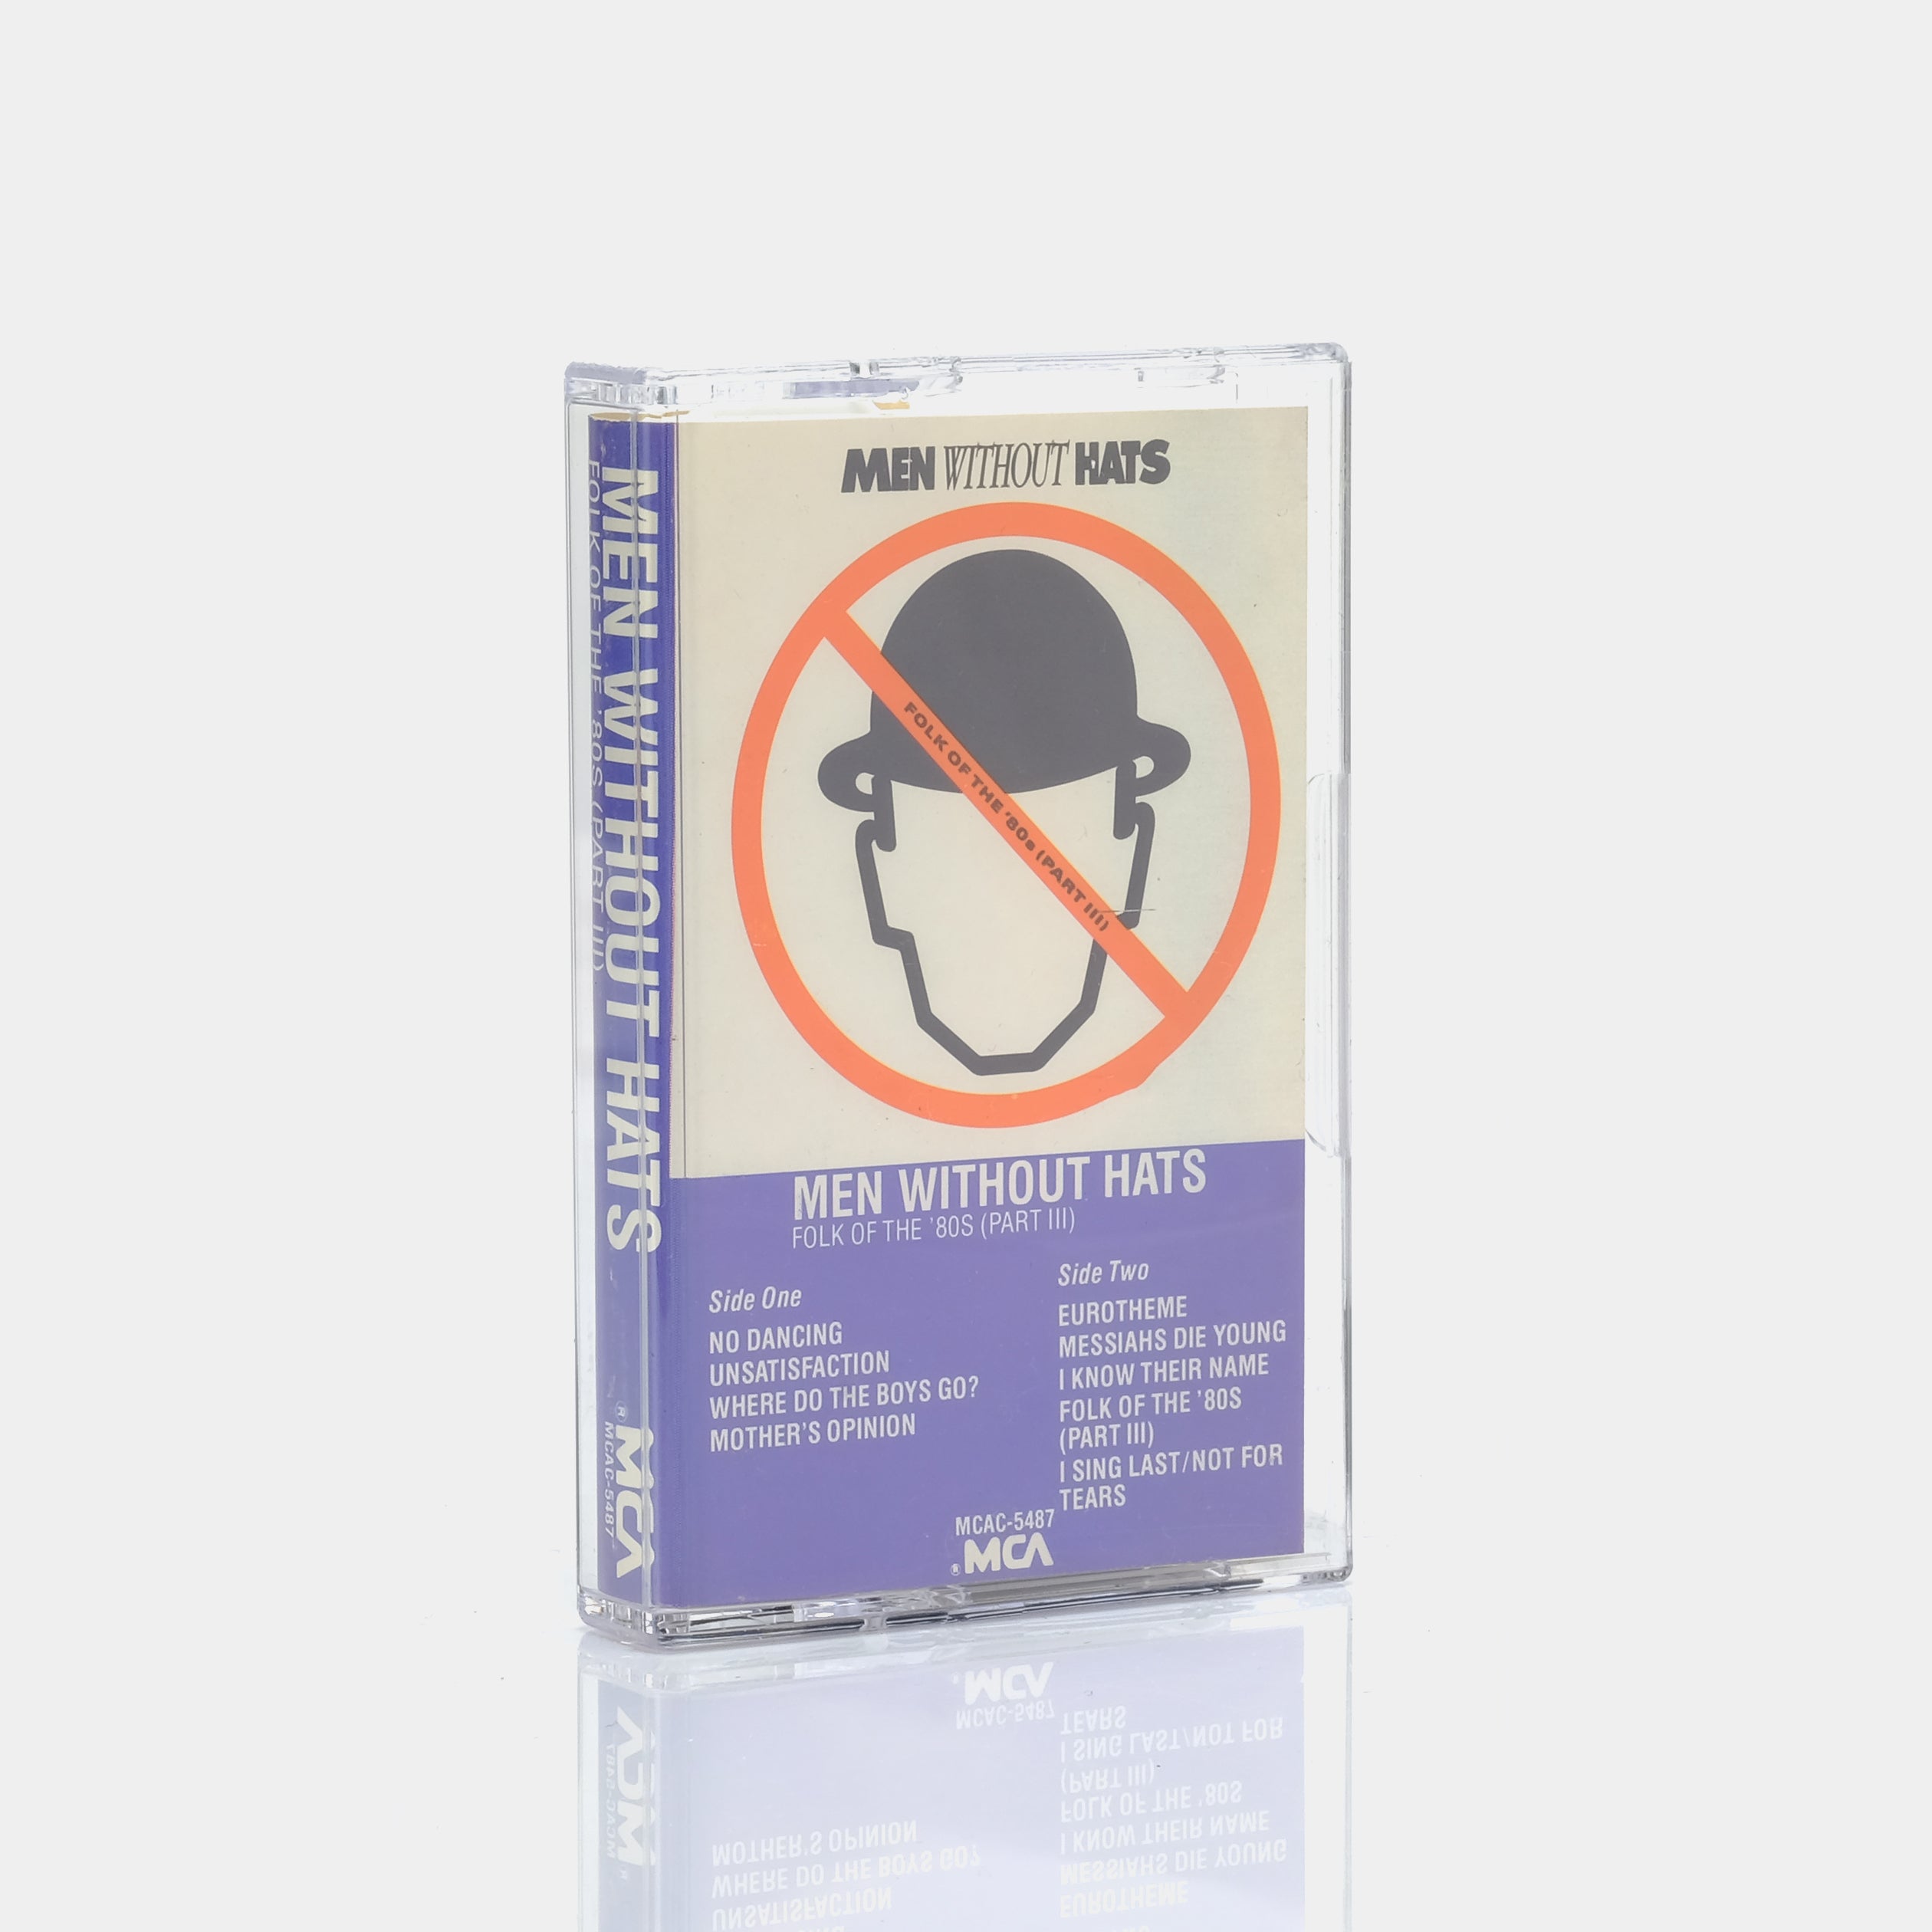 Men Without Hats - Folk Of The 80s (Part III) Cassette Tape